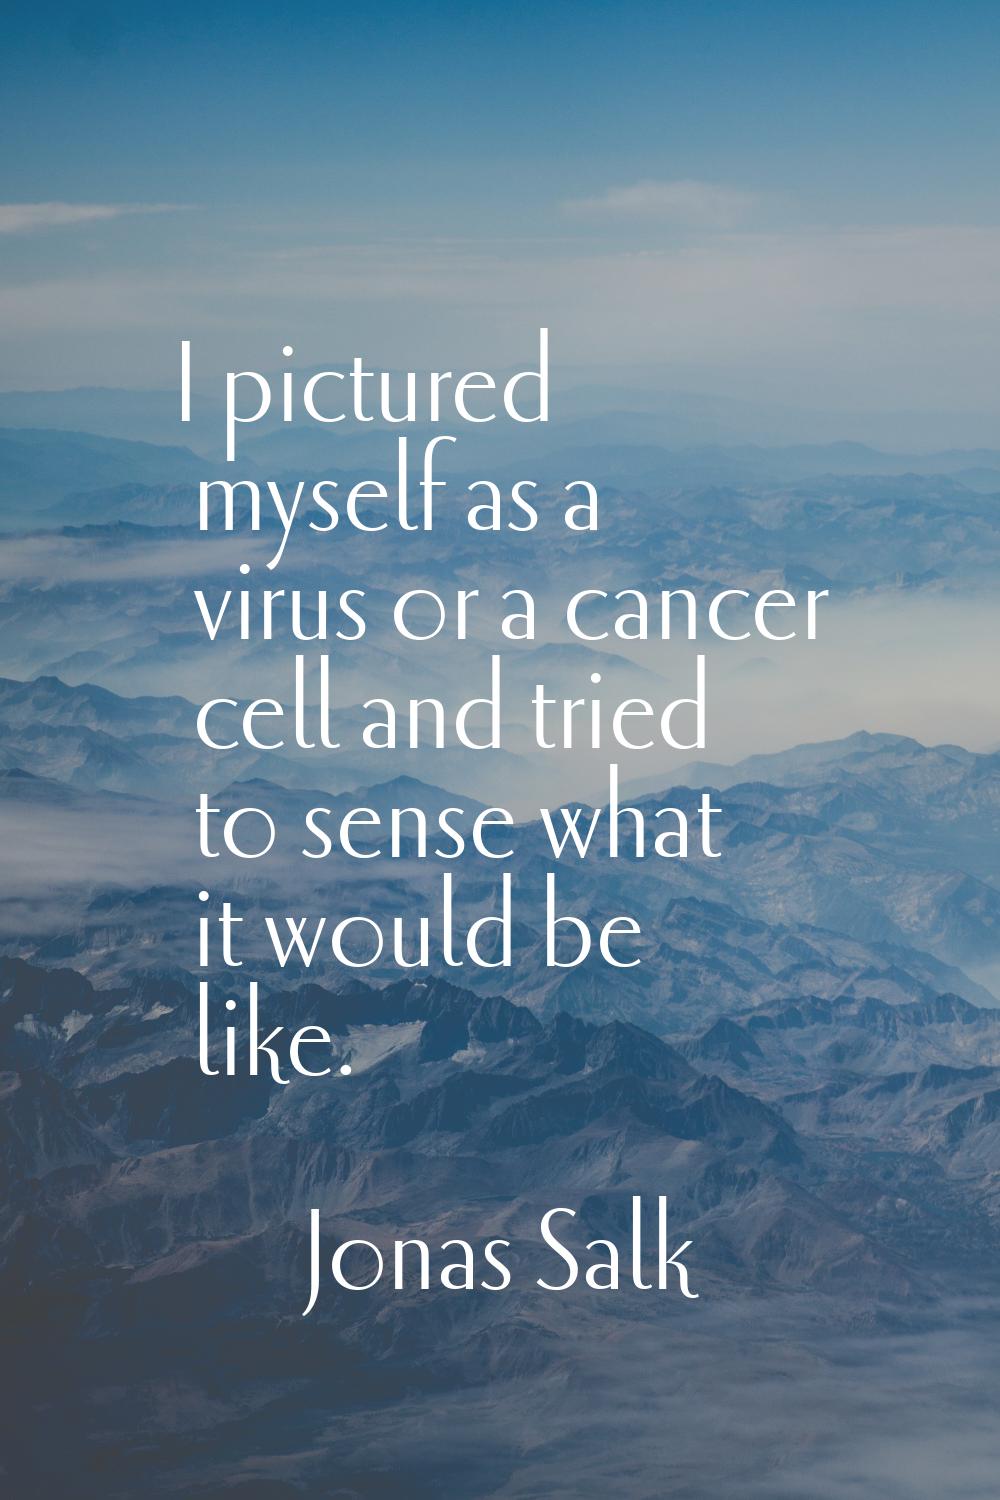 I pictured myself as a virus or a cancer cell and tried to sense what it would be like.